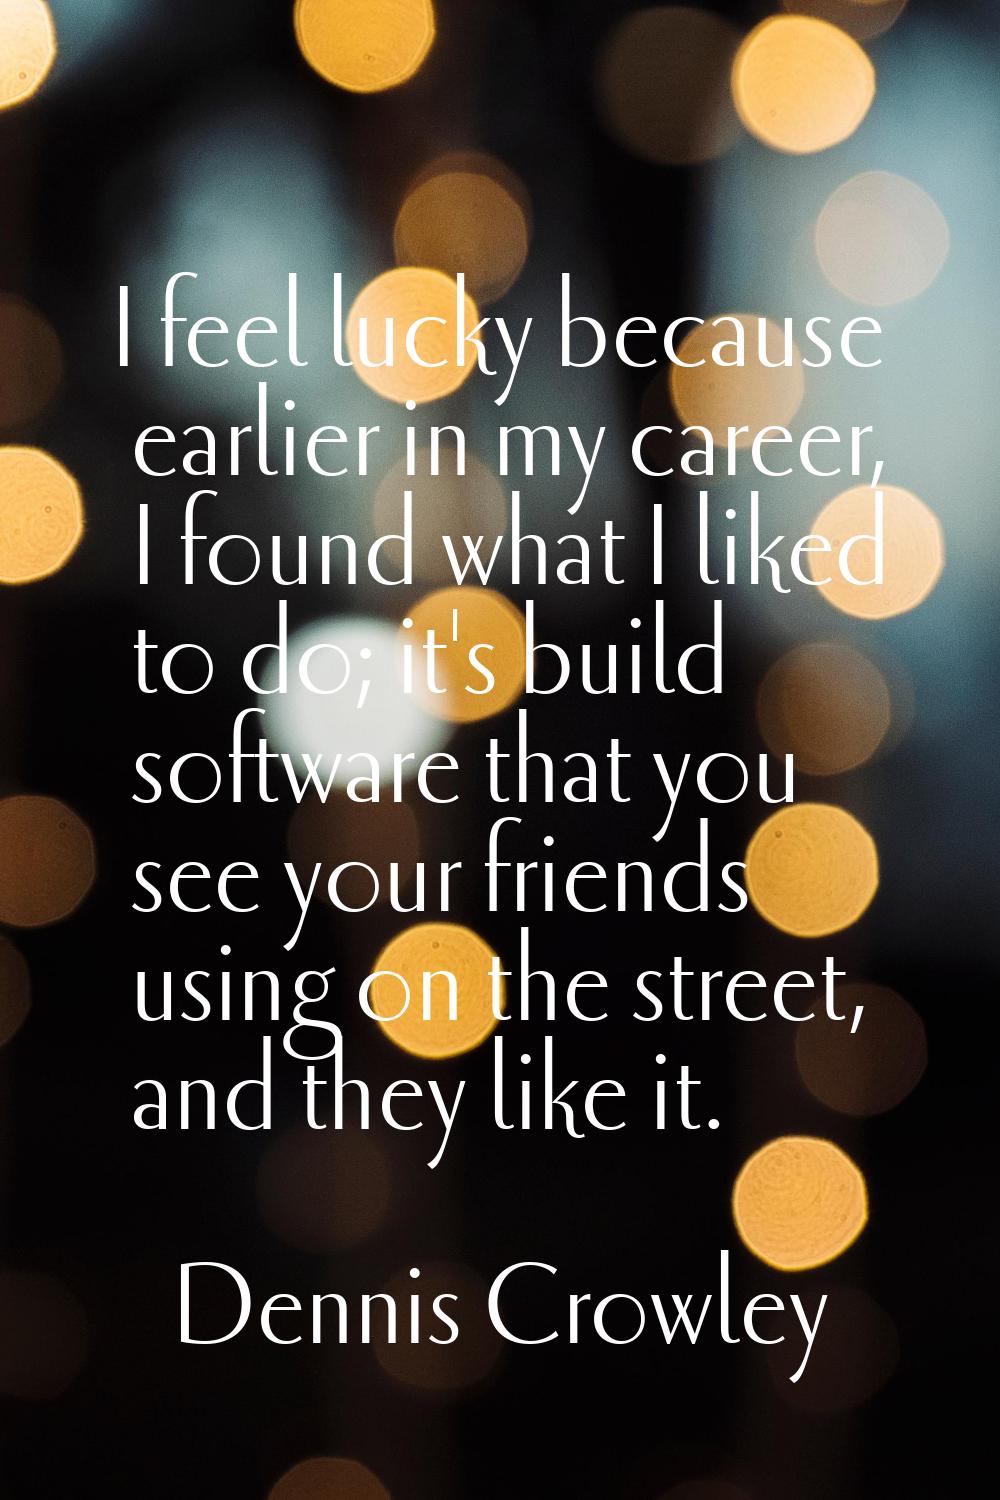 I feel lucky because earlier in my career, I found what I liked to do; it's build software that you